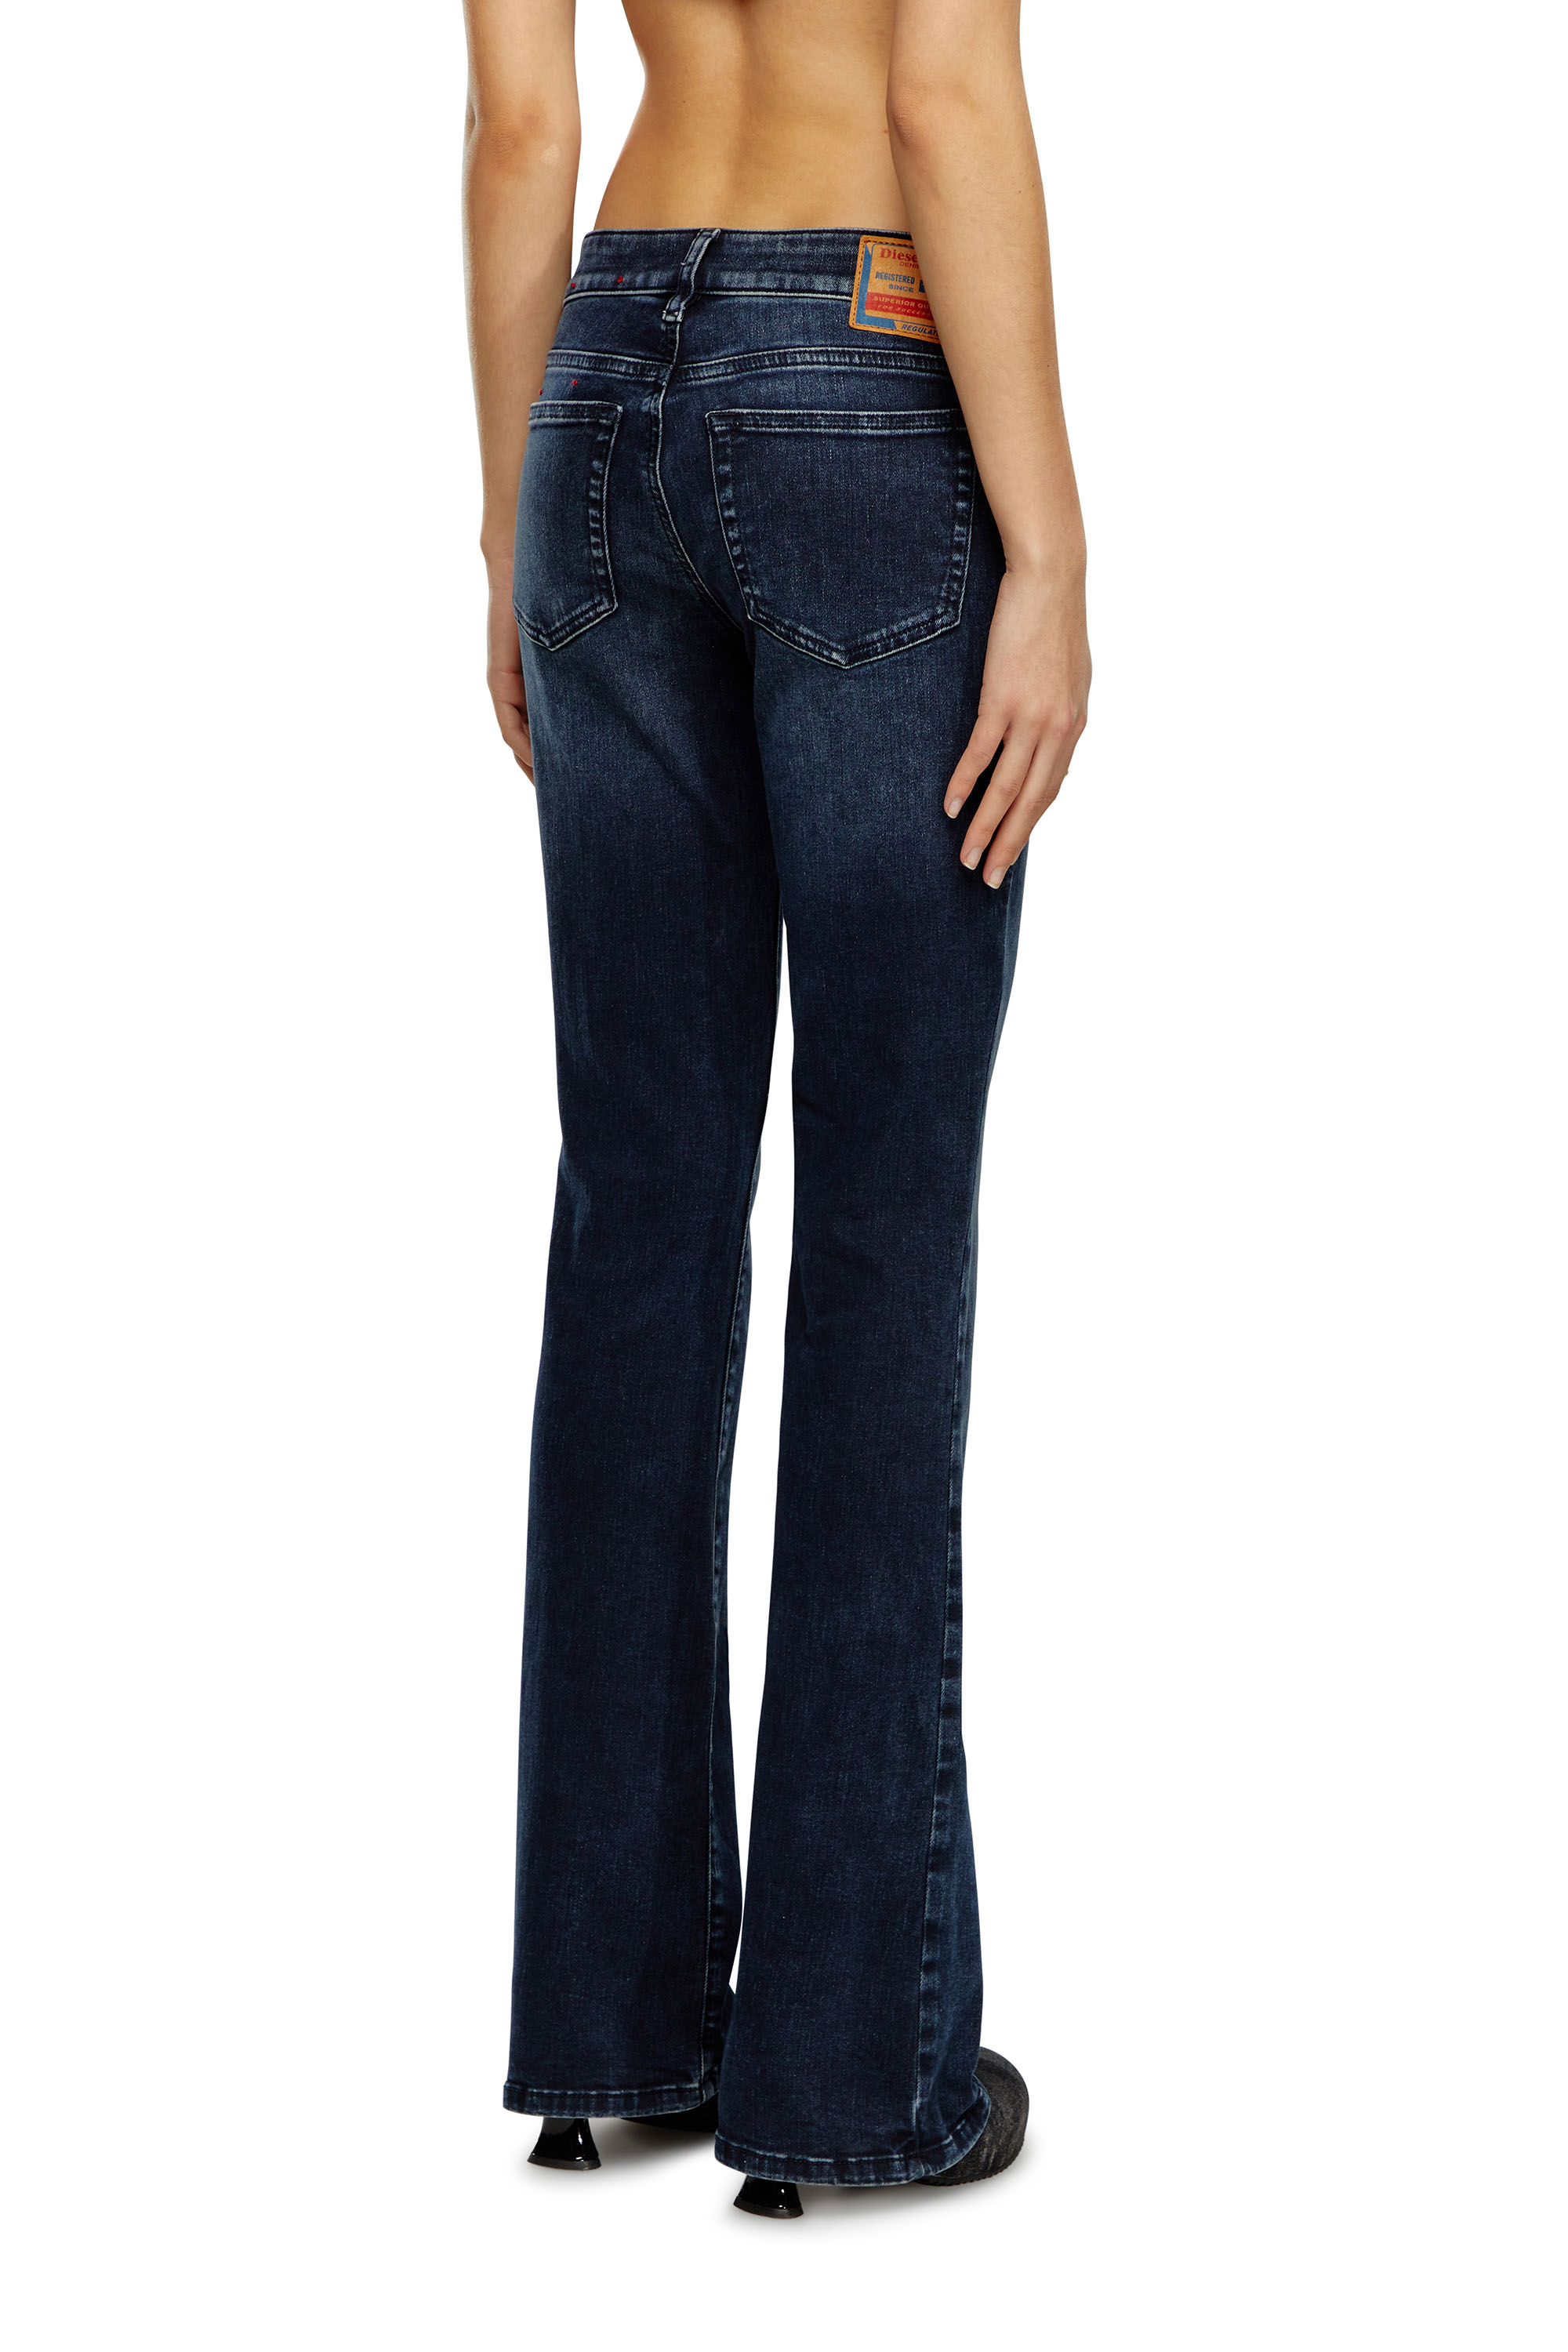 Sexy Dance Womens Low Waist Flared Jeans Bootcut Washed Denim Pants